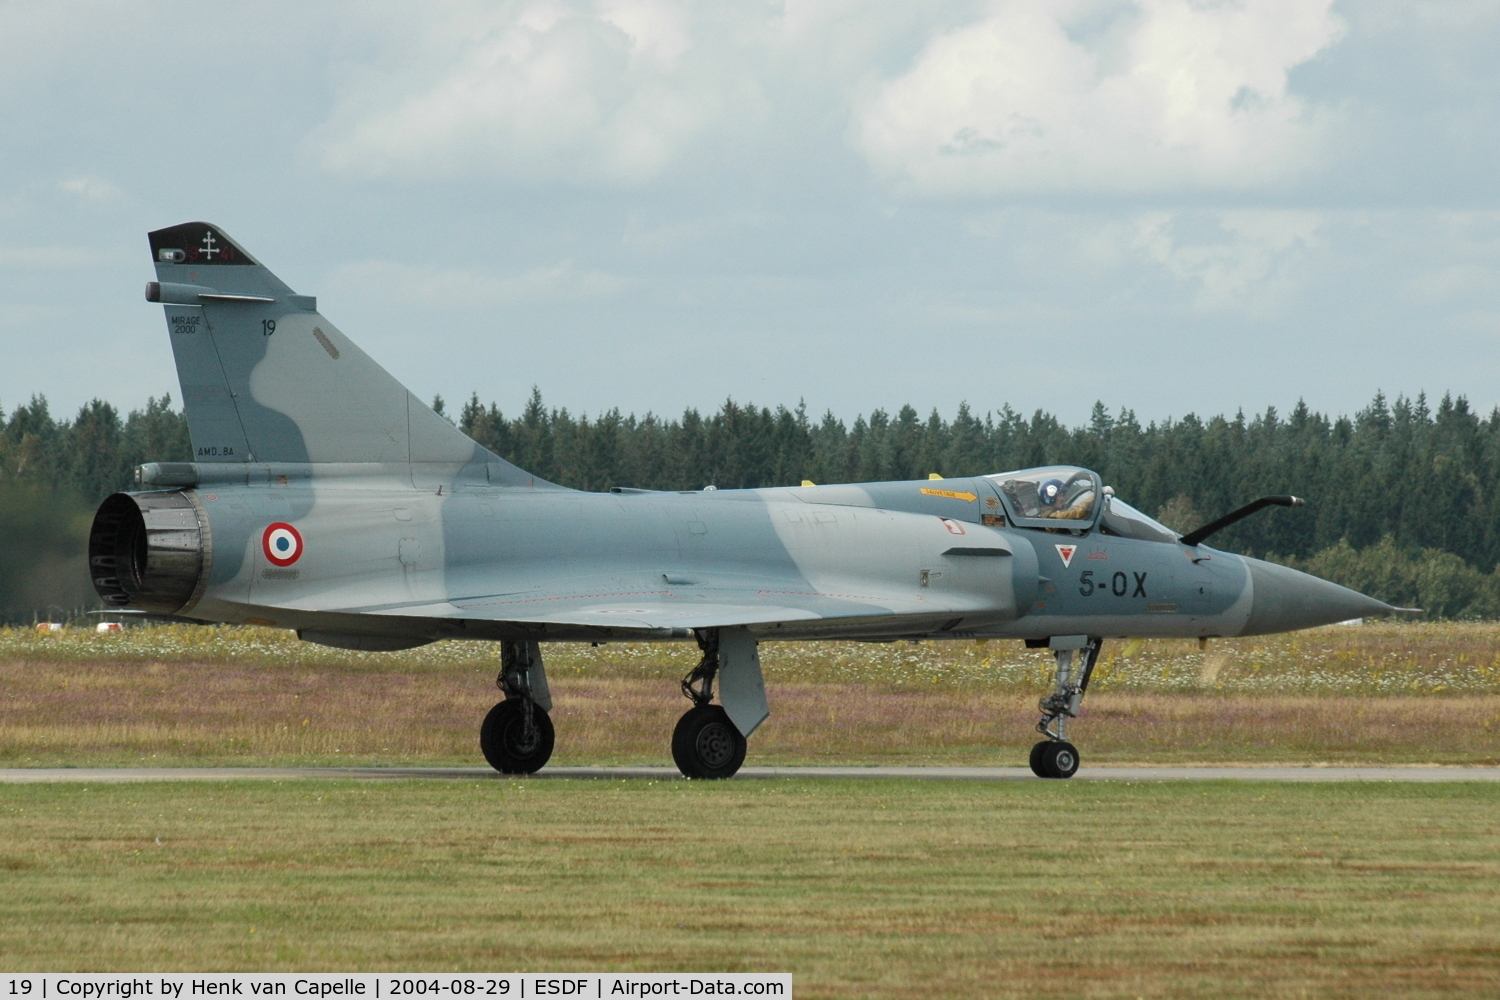 19, Dassault Mirage 2000C C/N 50, Dassault Mirage 2000C of EC02.005 of the Frencg Air Force, here with code 5-OX, taxying in after a display at Ronneby Air Base, Sweden